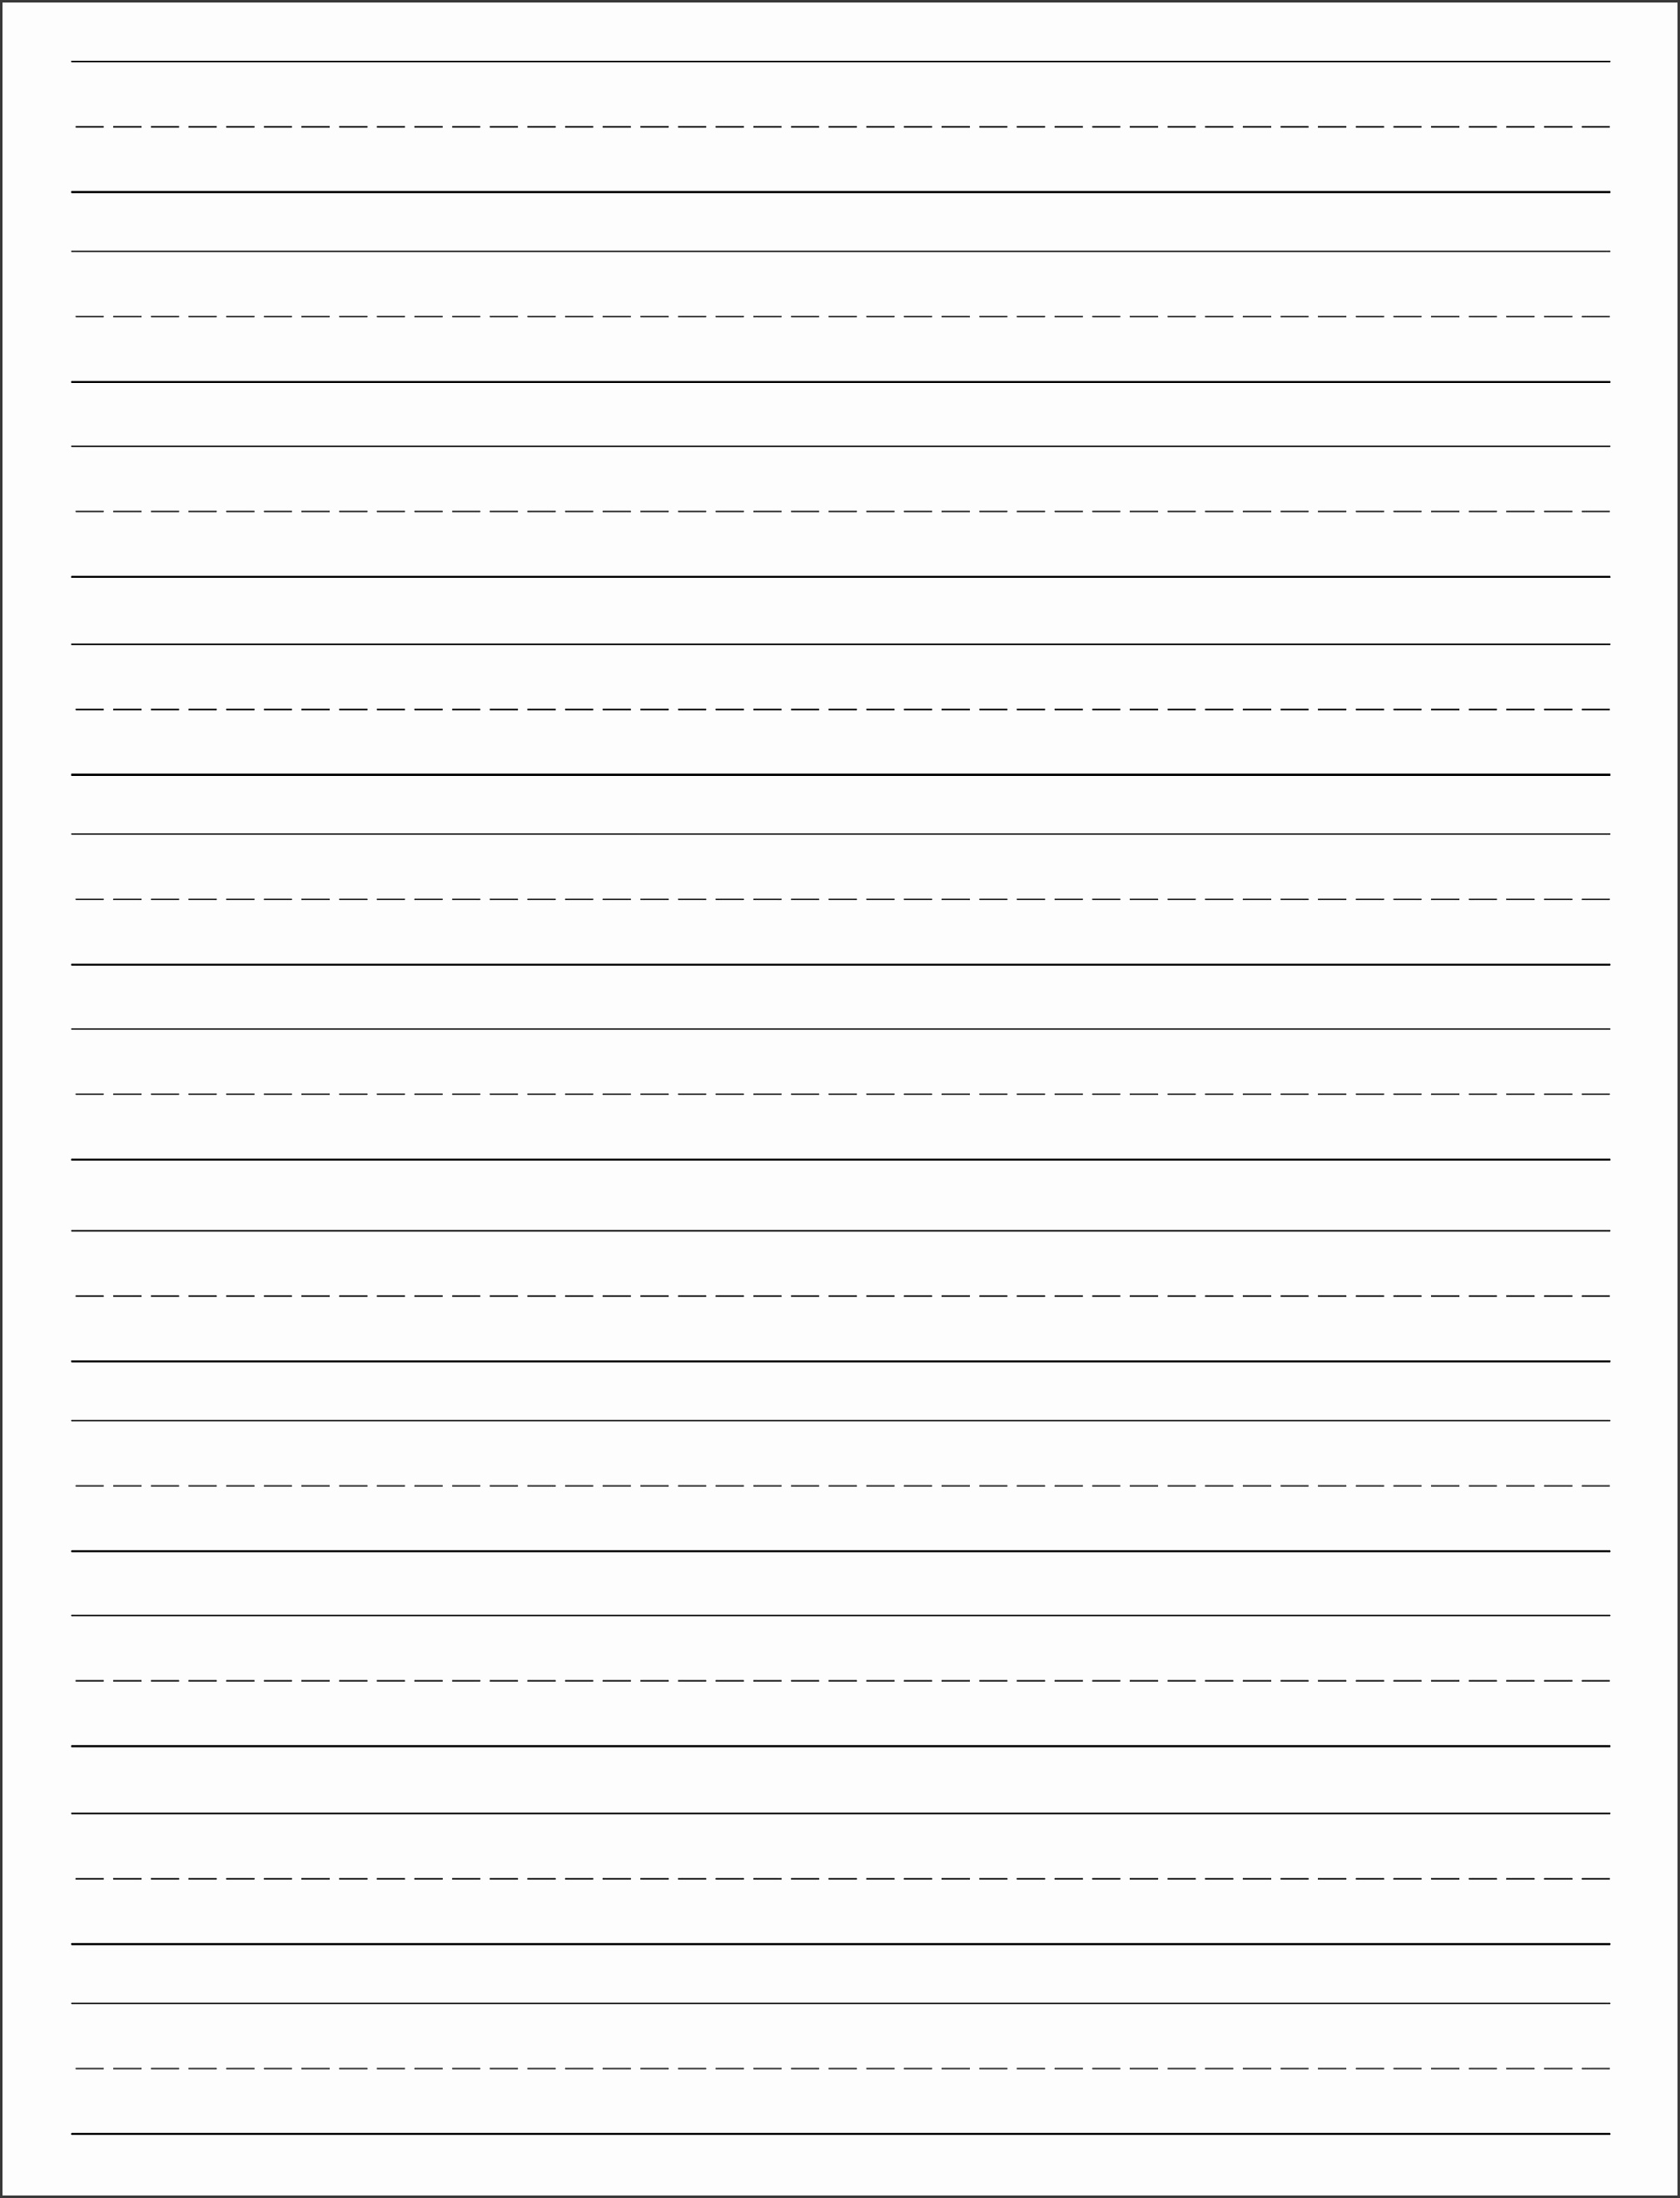 10 Primary Lined Paper Template - SampleTemplatess ...